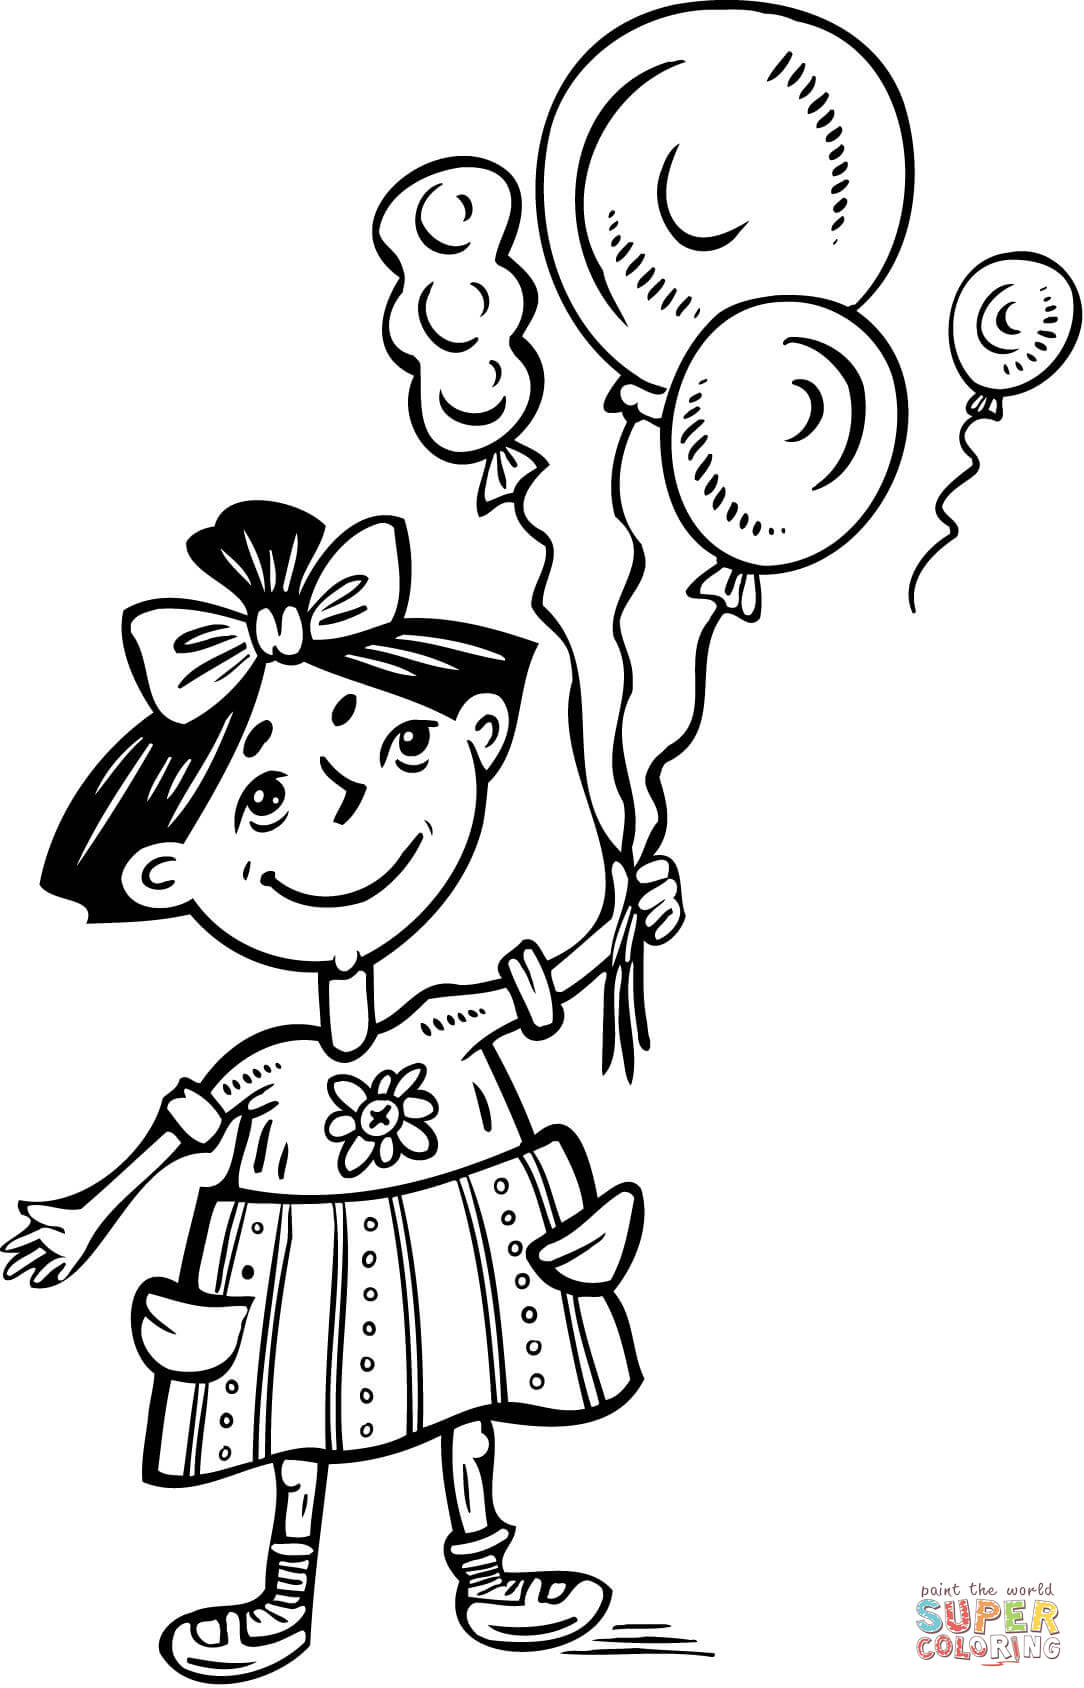 Little Girl Holding Balloons coloring page | Free Printable ...